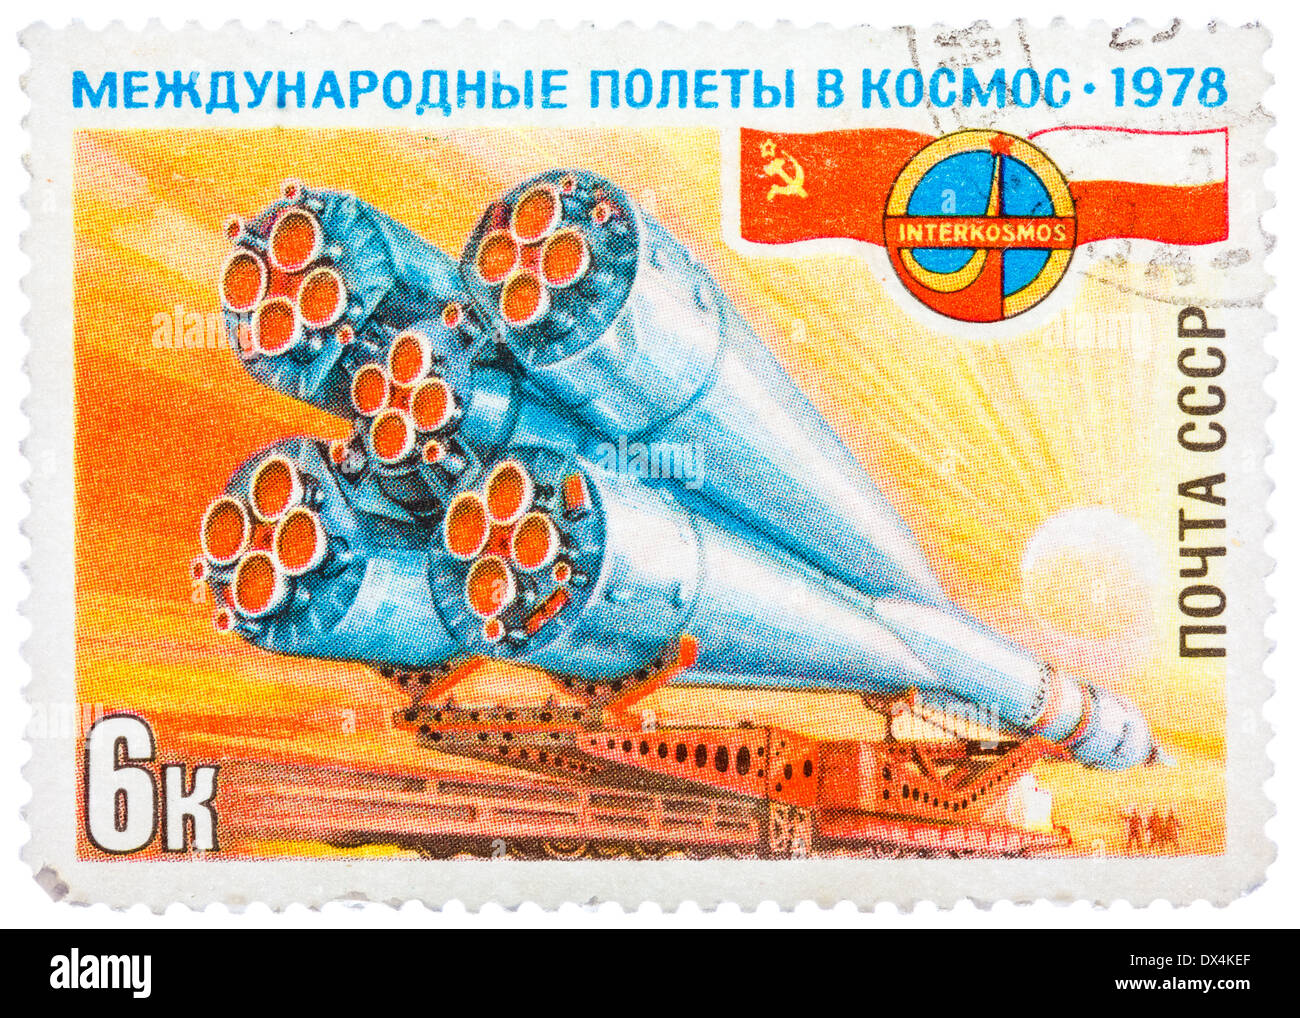 stamp printed in USSR, International flights into space, Intercosmos, delivery of spacecraft to rocket launch pad for space Stock Photo